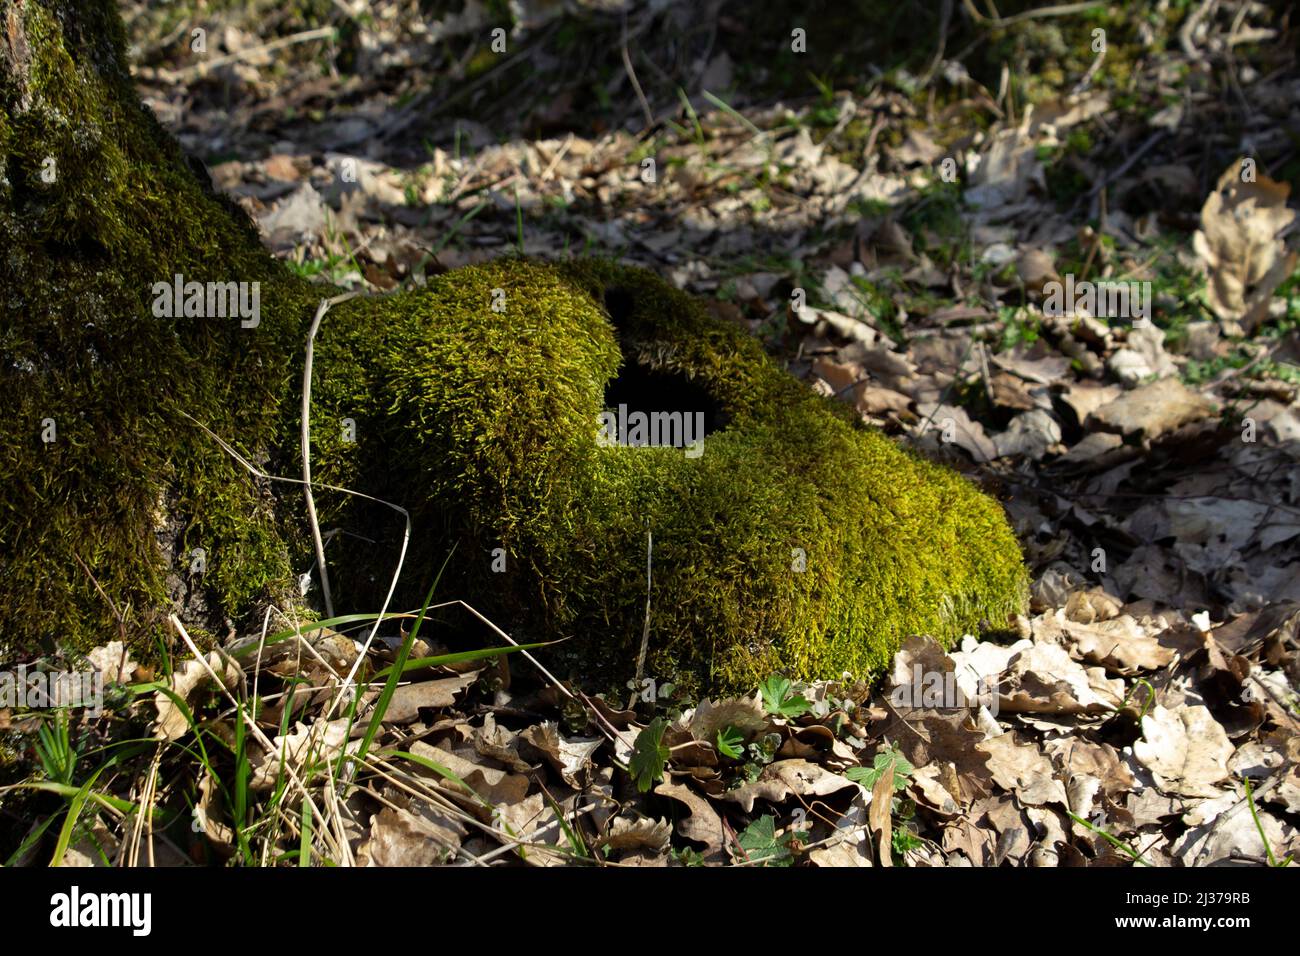 Moss on tree roots with hole in center, wild animal nest, autumn in forest with fallen leaves Stock Photo